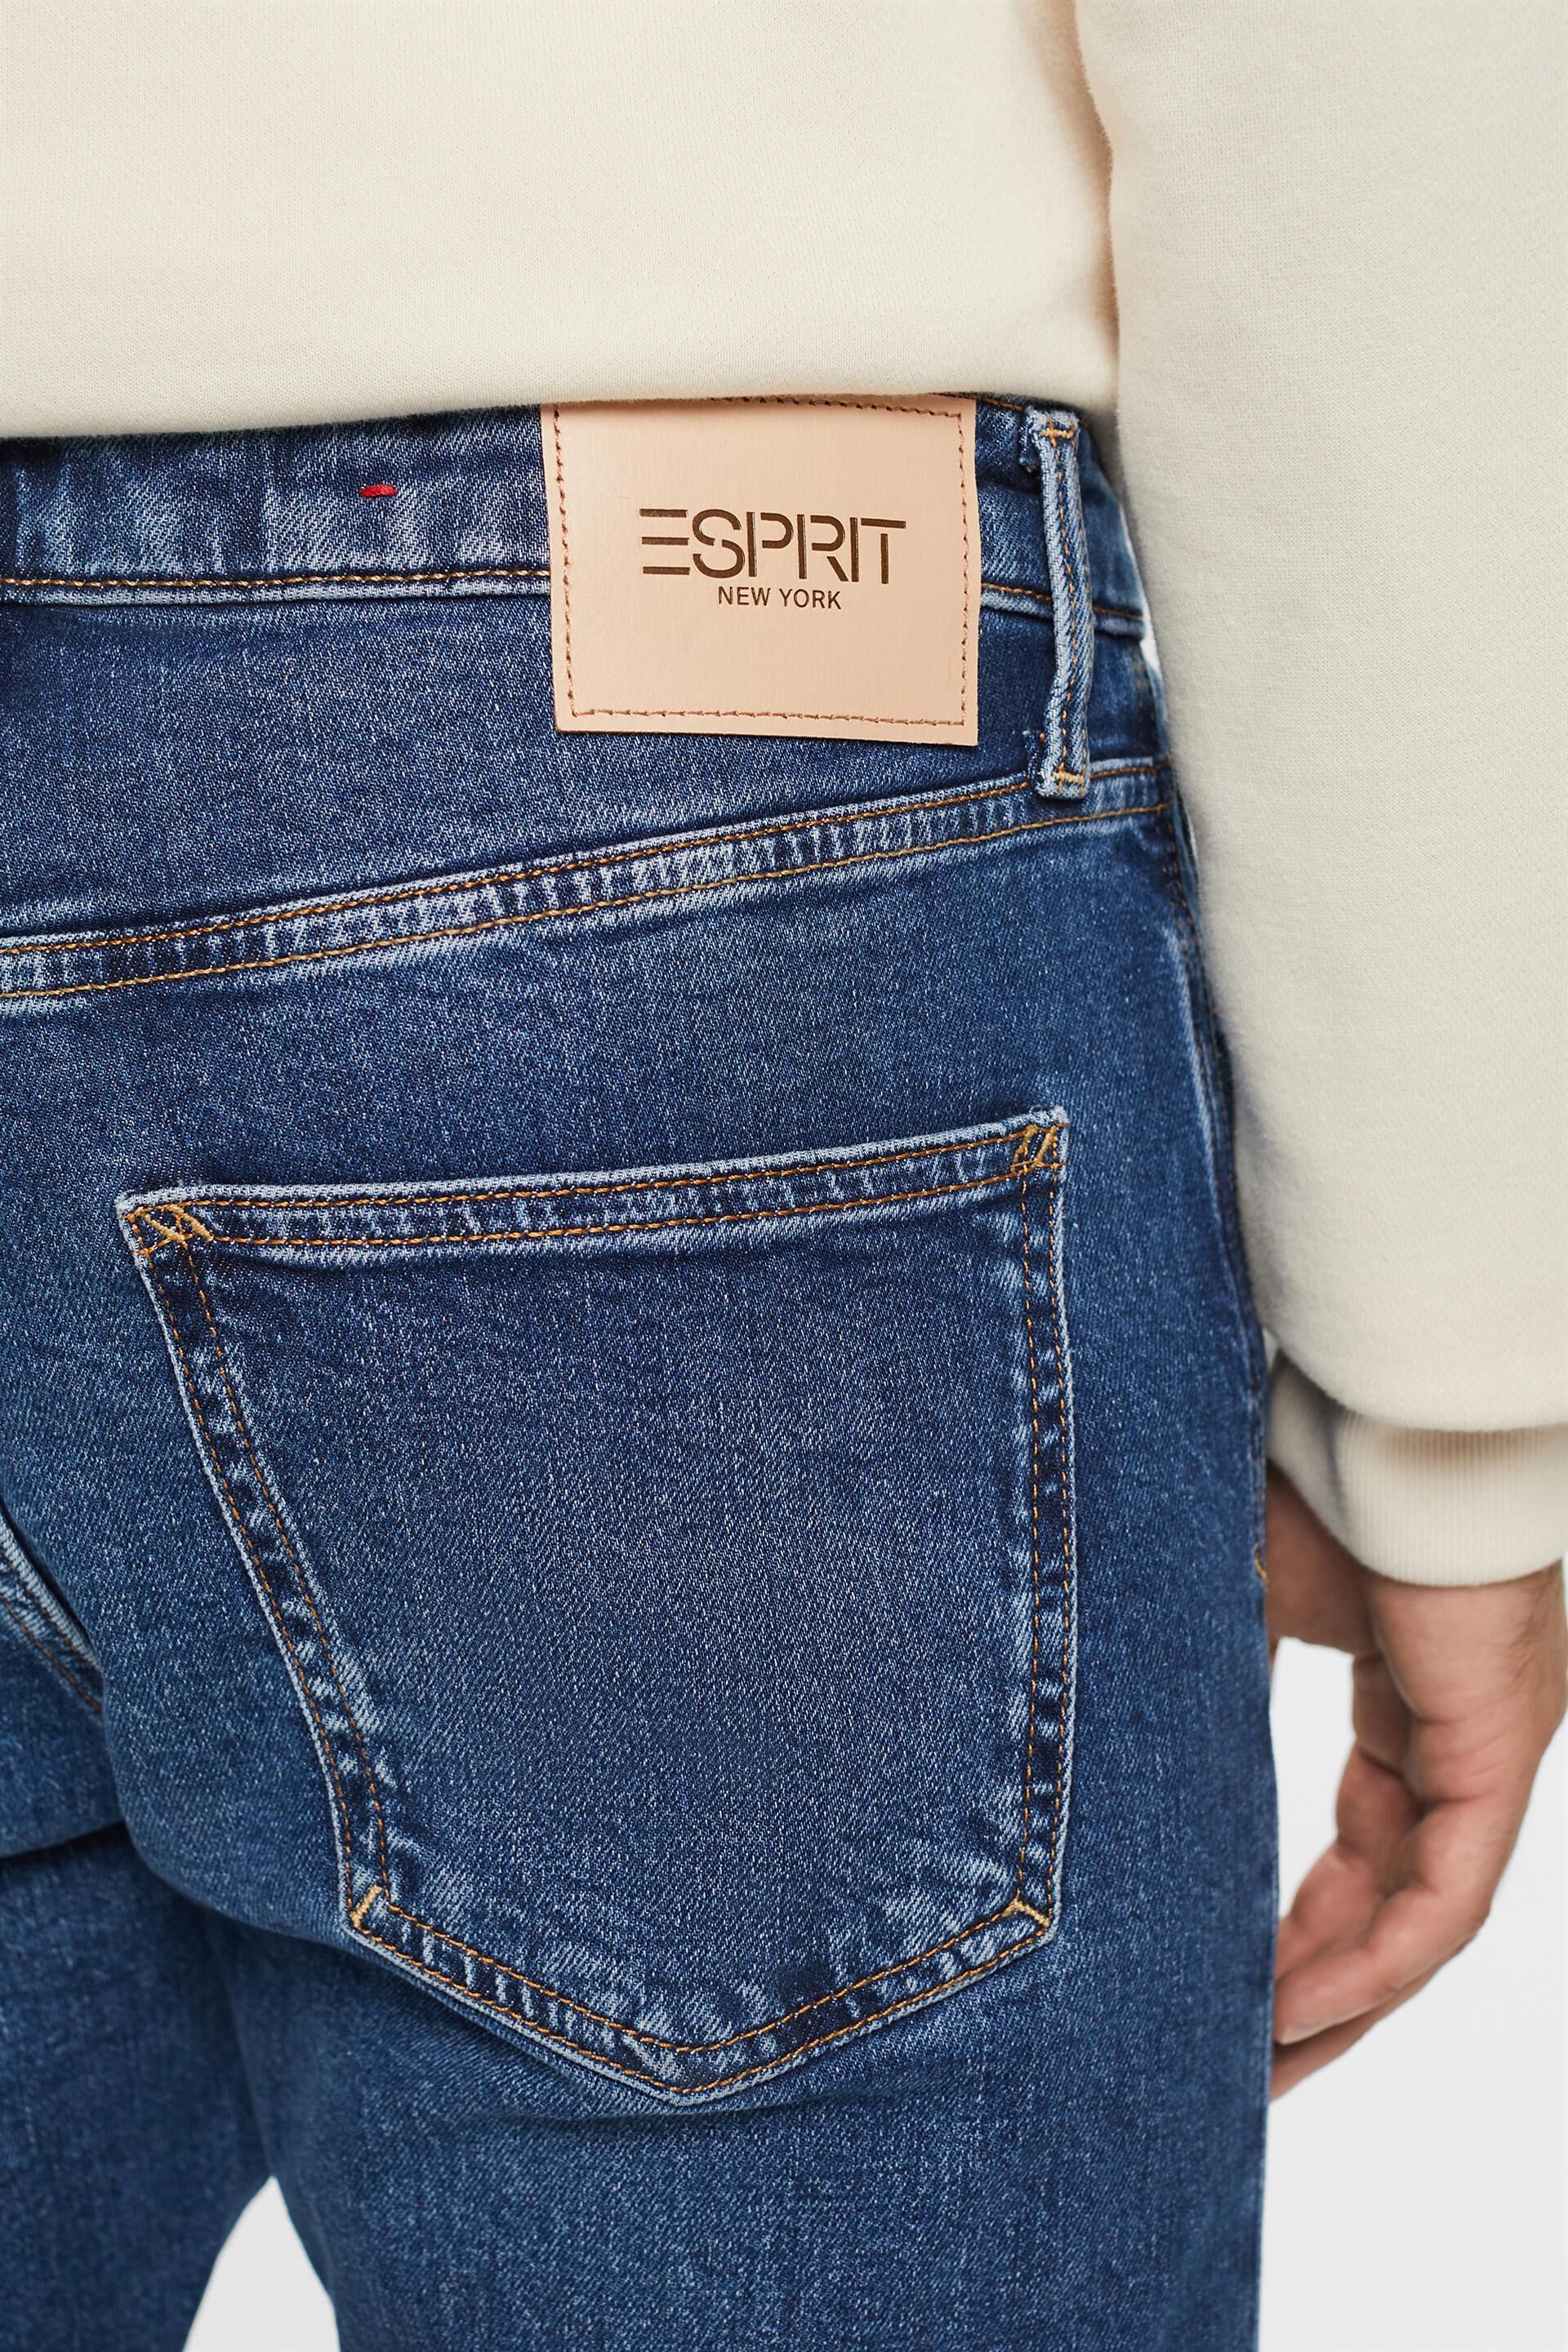 jeans - fit ESPRIT our slim at shop online Recycled: